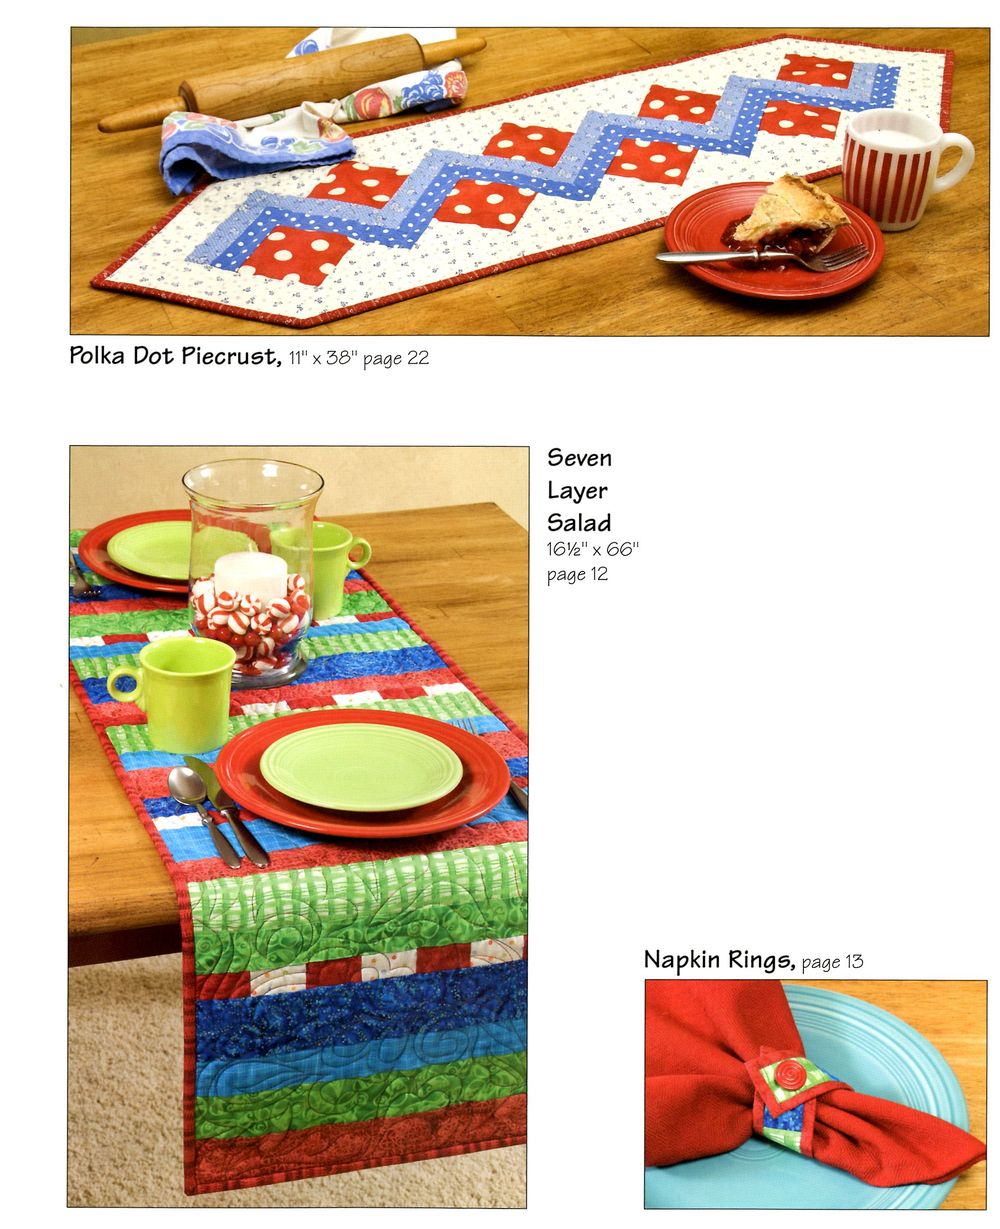 Let's Do Lunch Quilt and Sewing Pattern Book by Terry Atkinson of Atkinson Designs